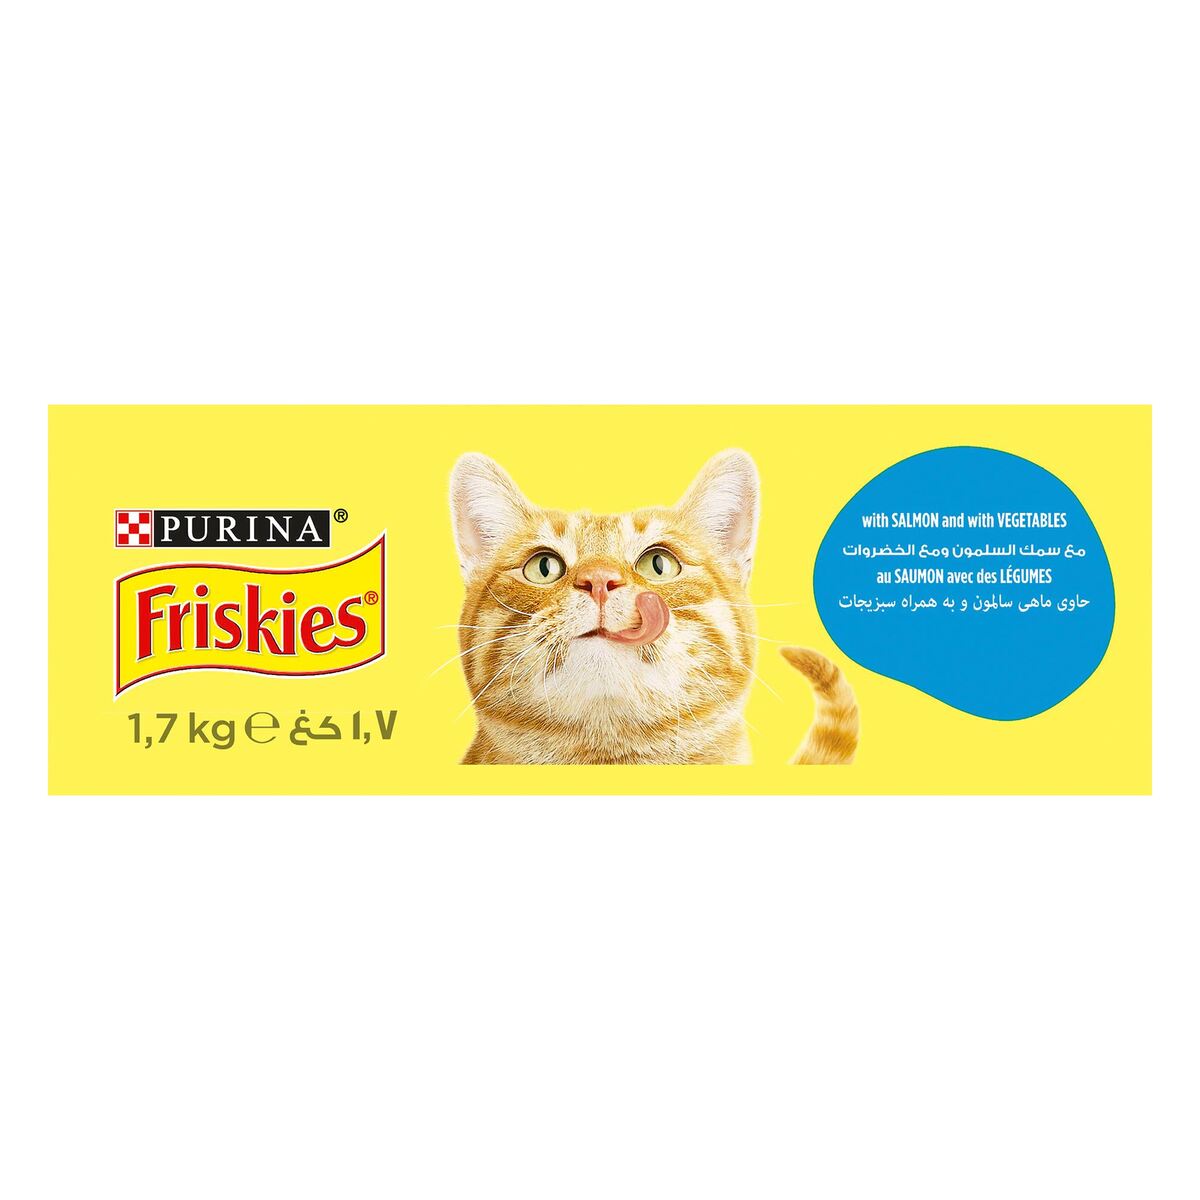 Purina Friskies Cat Food With Salmon And Vegetables 1.7kg